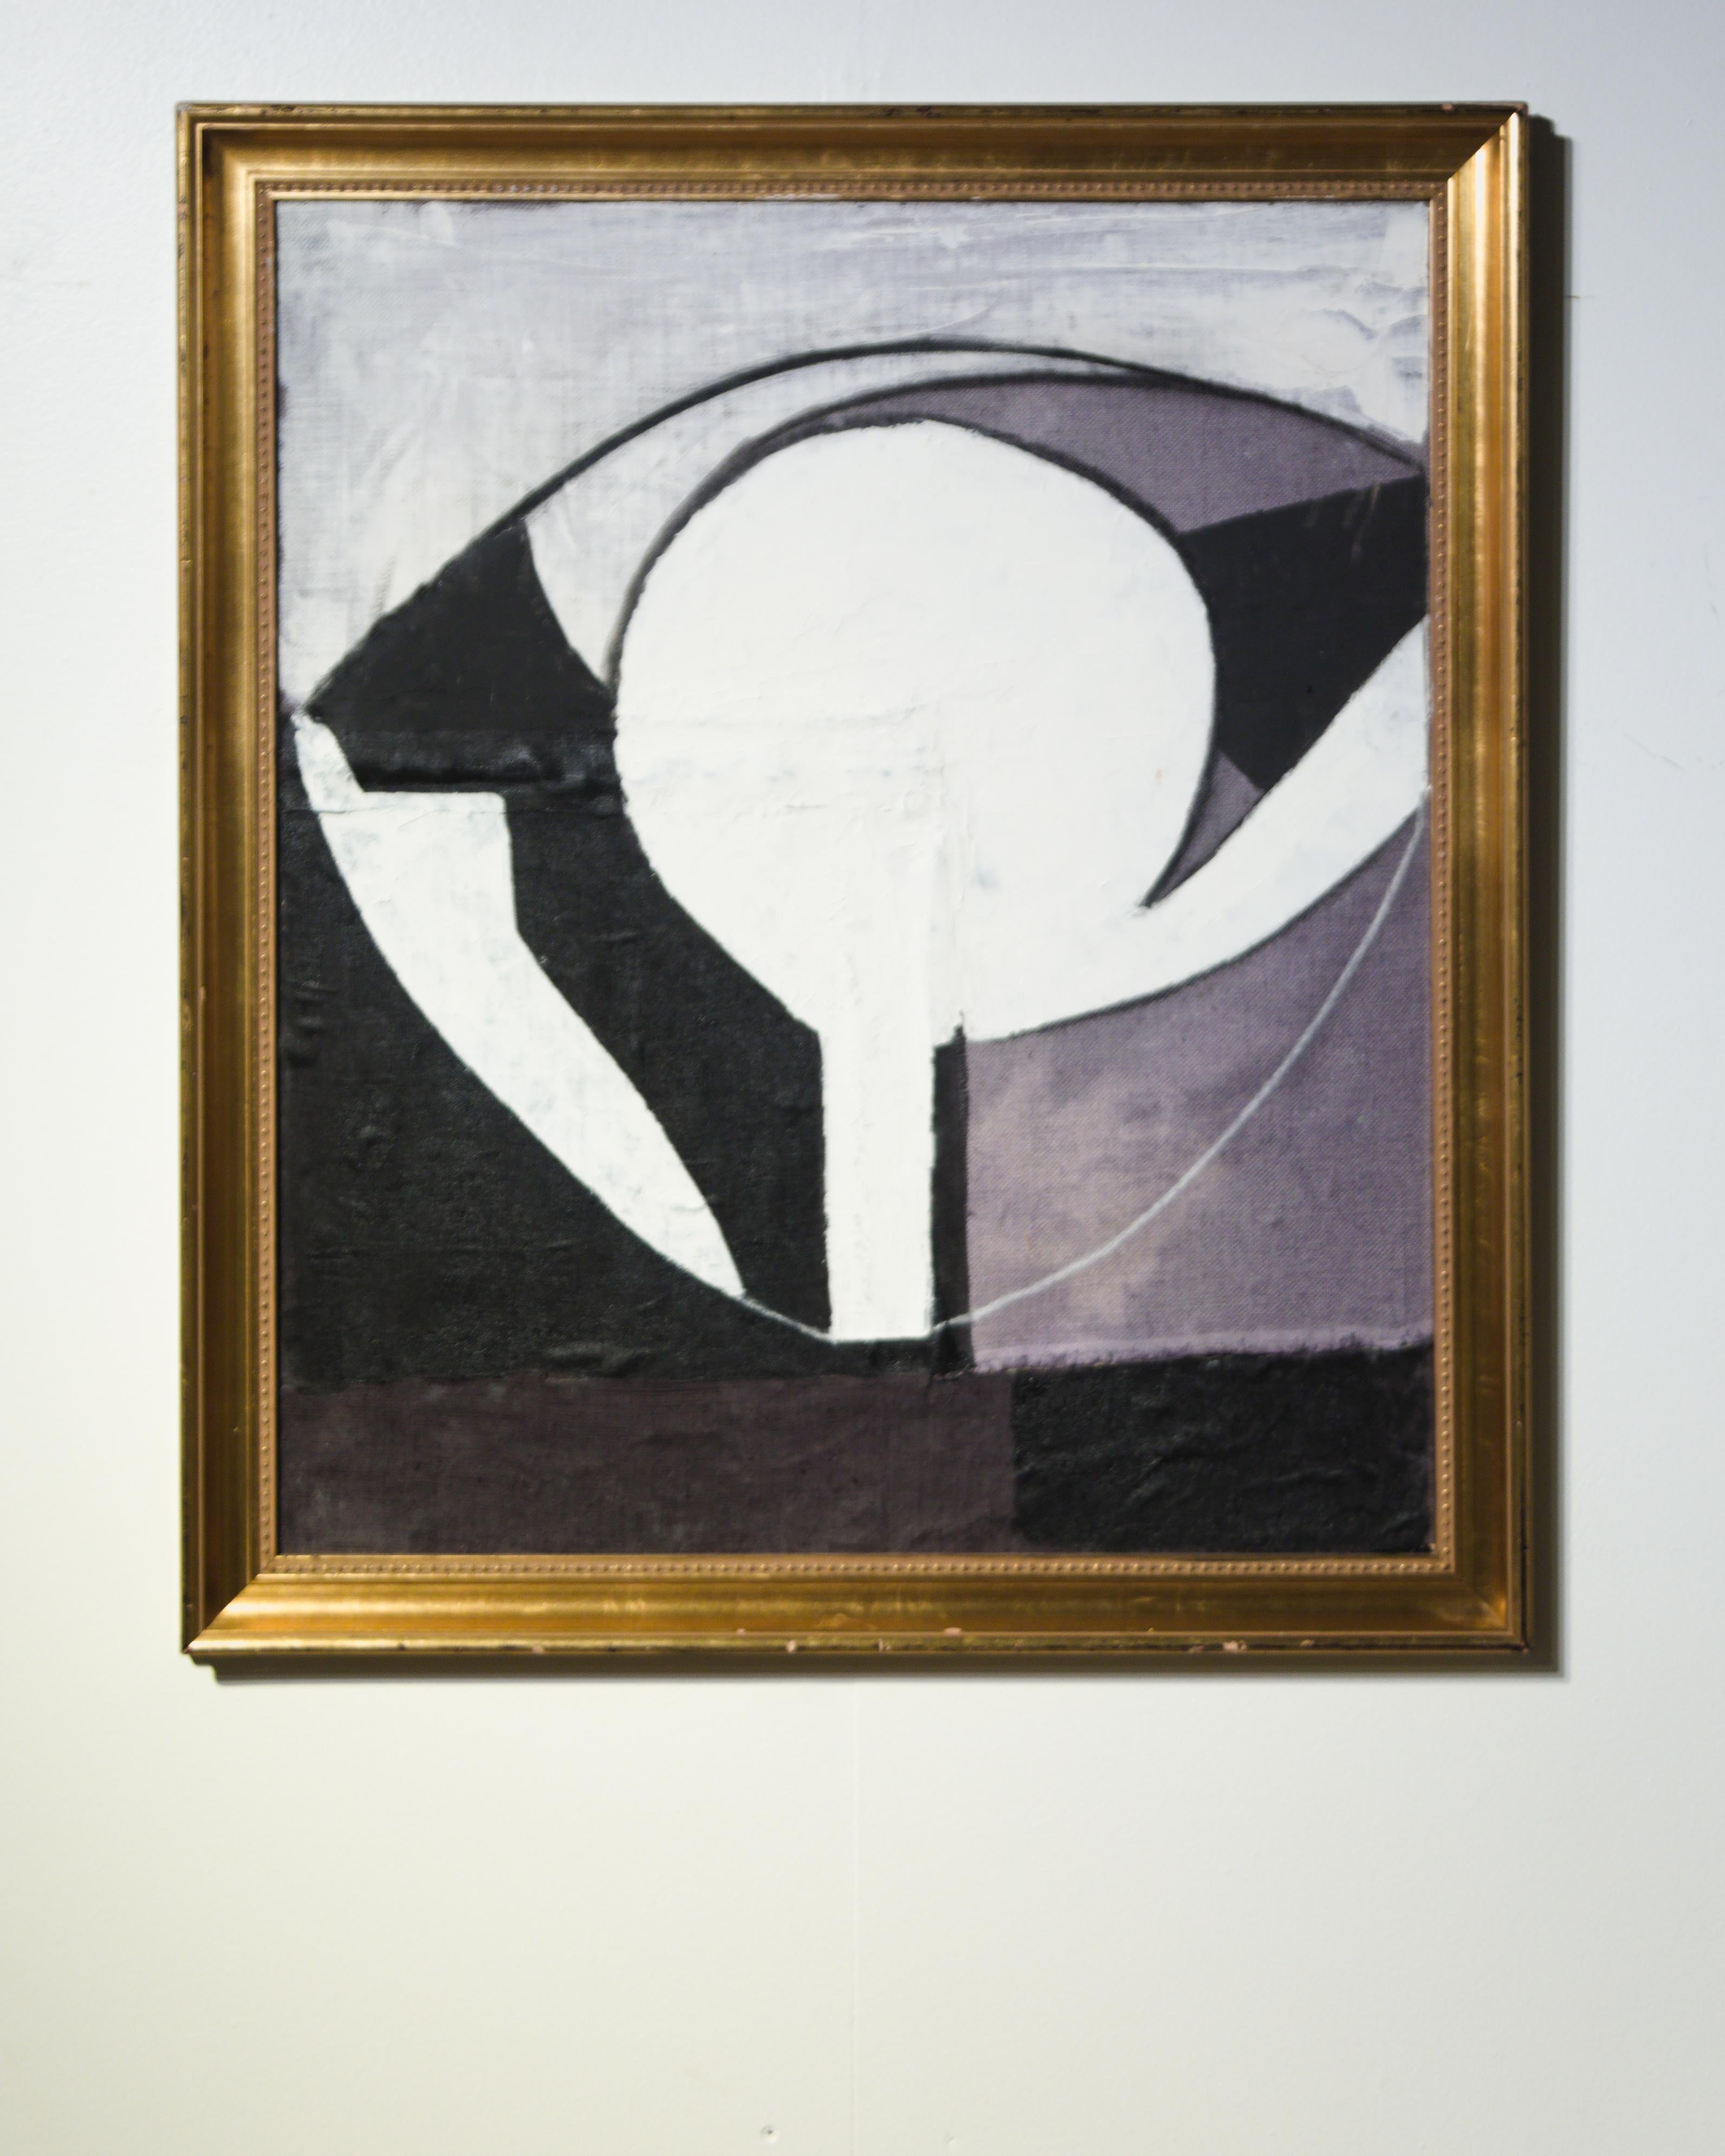 A framed textile collage by artist Raoul Morren, made in 2023. The harmonious composition is created with a palette of cool neutral greys, inflected by graphic painted black and white. Designed to be displayed with any orientation.

Raoul Morren,